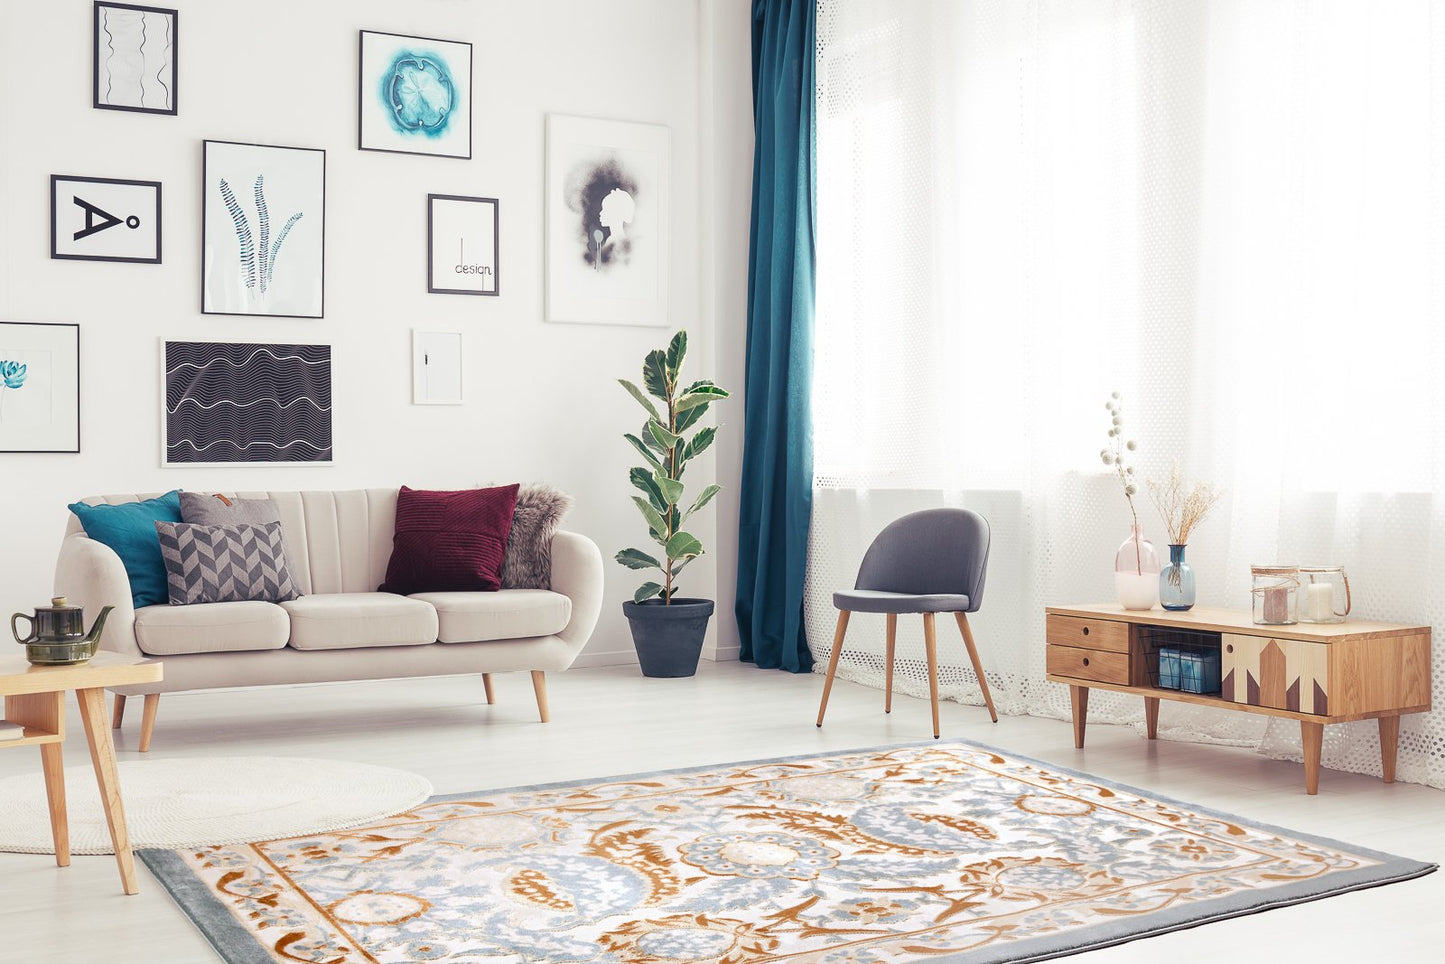 ladole rugs abstract traditional pattern turkish beige blue white contemporary area rug carpet 4x6 311 x 53 120cm x 160cm 5x7, 5x8 ft Contemporary, Living Room Carpet, Bedroom, Home Office